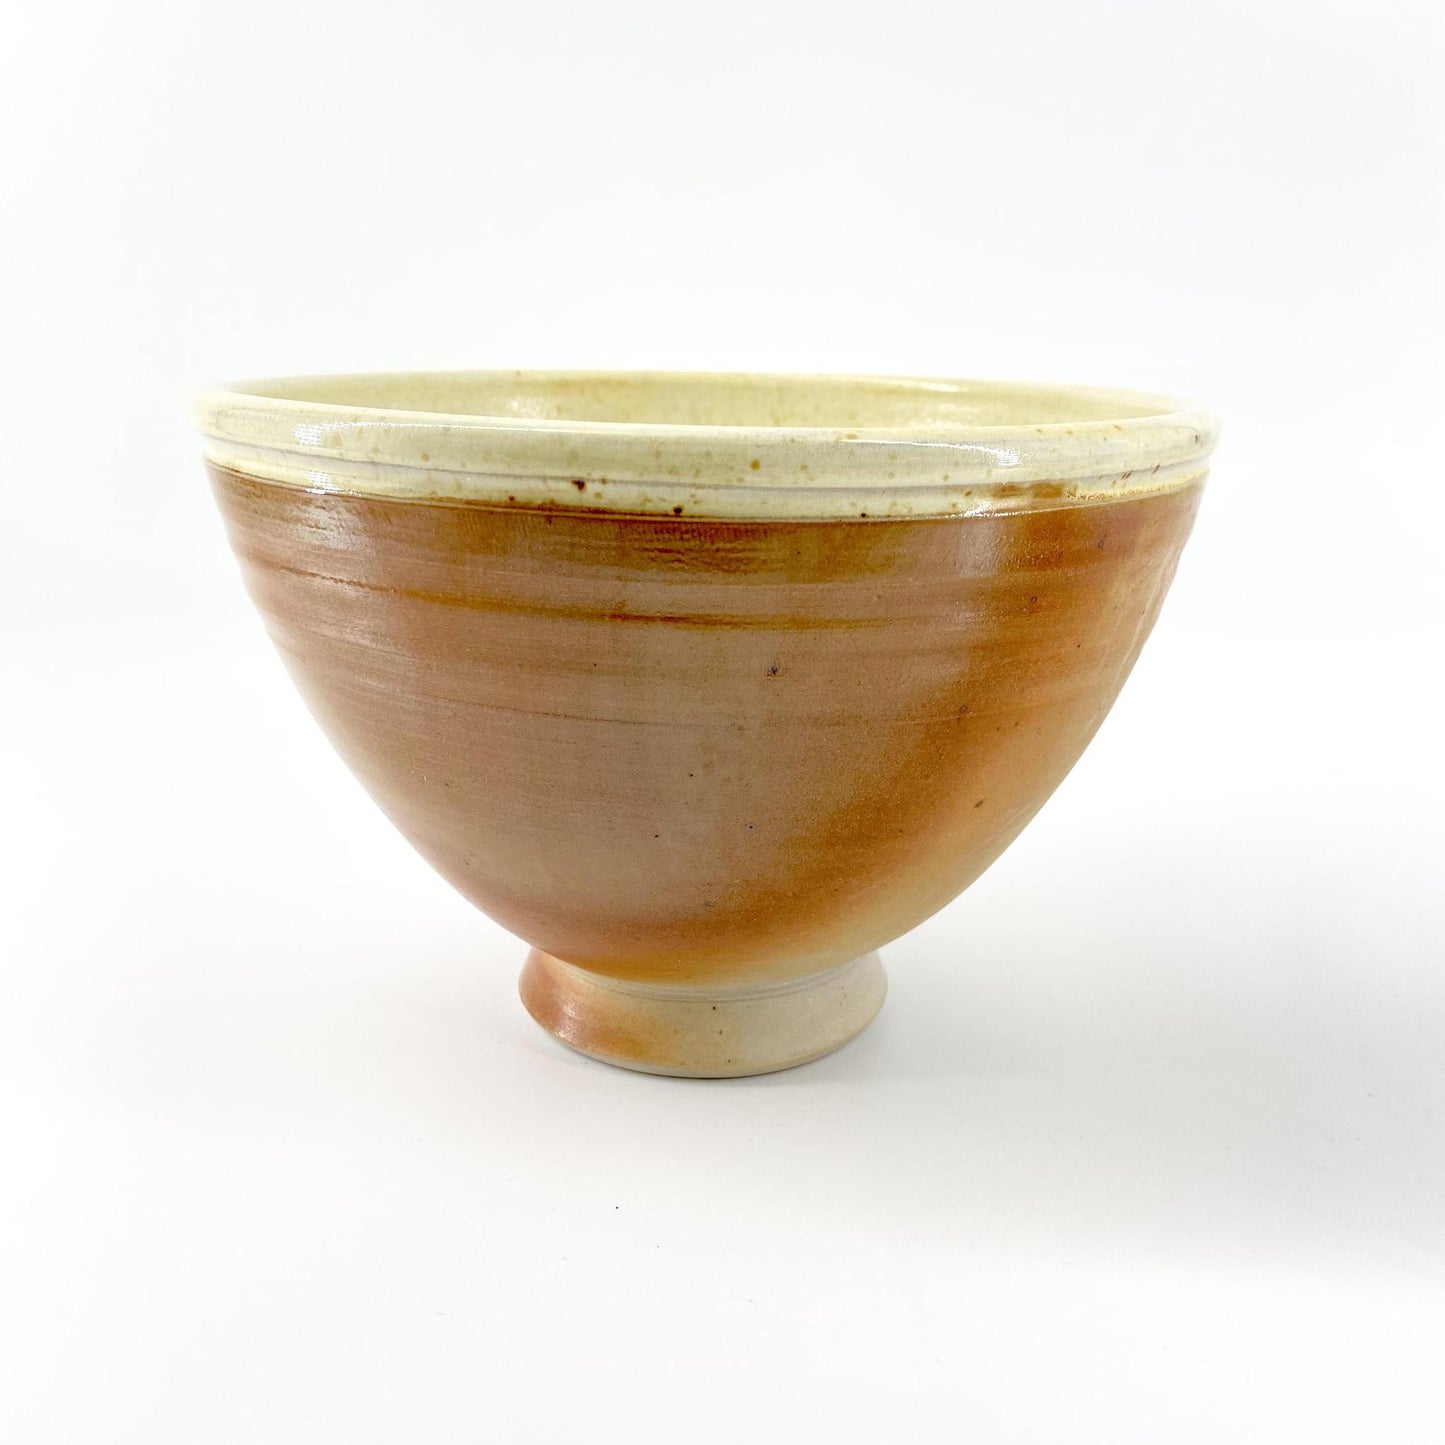 Bowl - Footed "Every Day" Bowl - Handmade Pottery